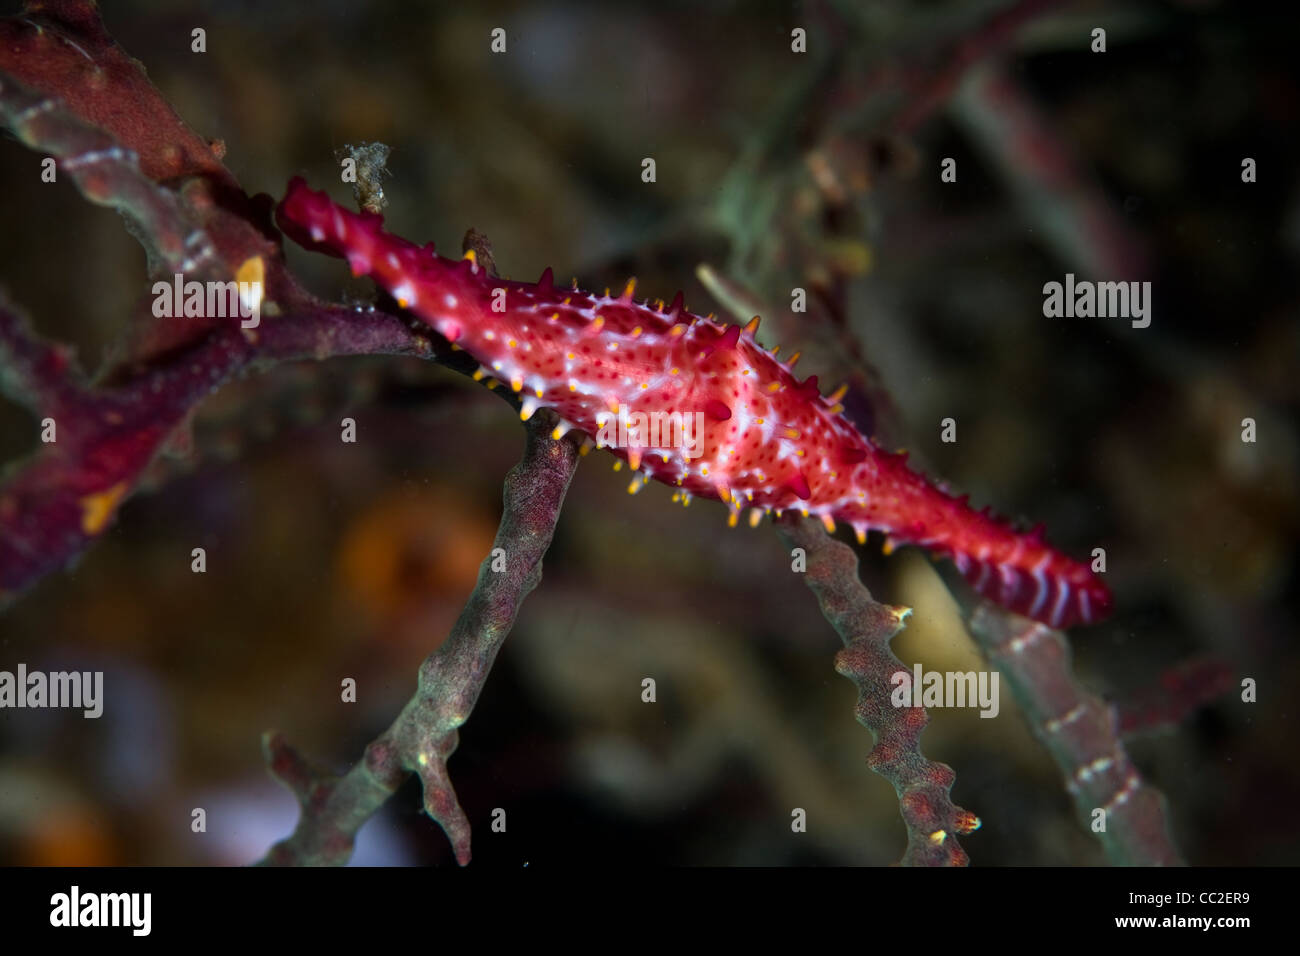 A Rosy spindle cowrie (Phenacovolva rosea) clings to the branches of a gorgonian on a diverse coral reef. Stock Photo